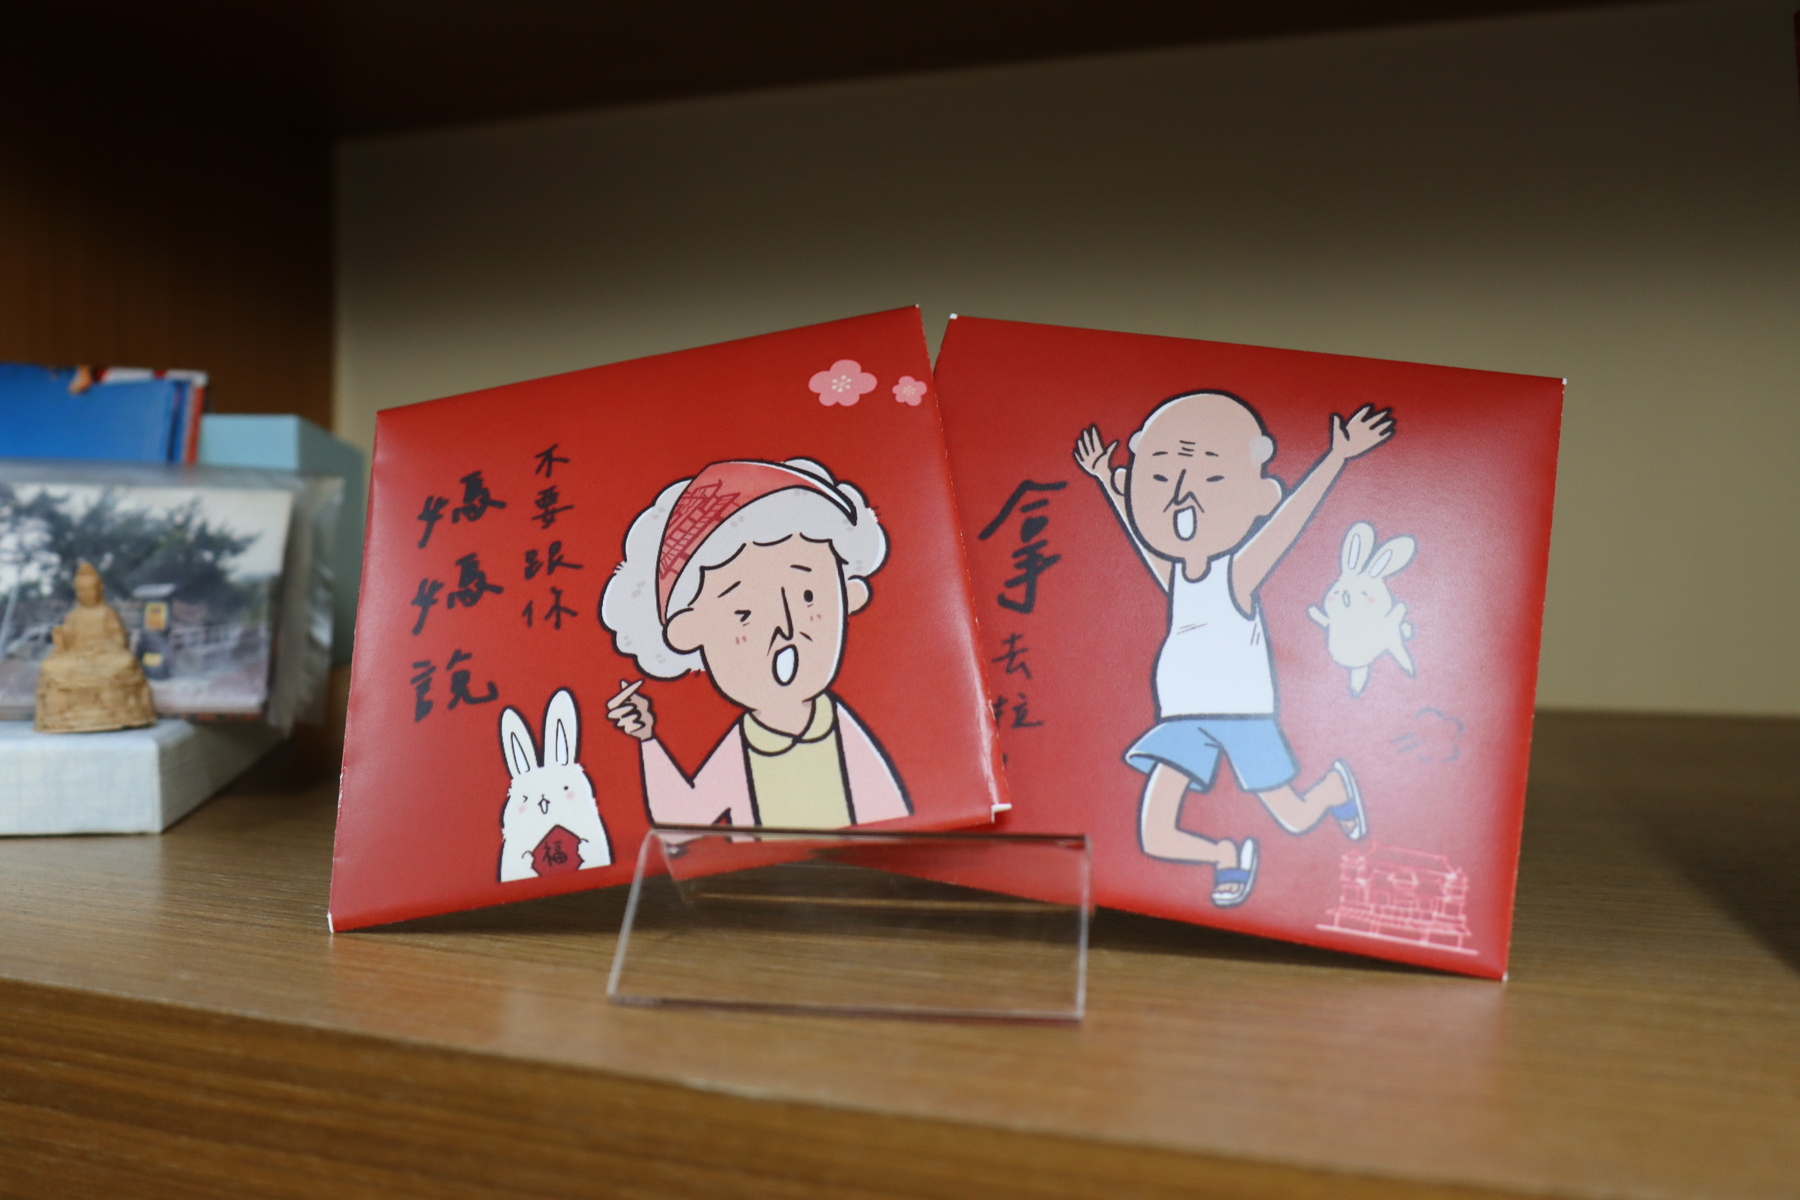 The “Grandpa and Grandma in Sheng Gong Ma Temple” red envelopes made by students.